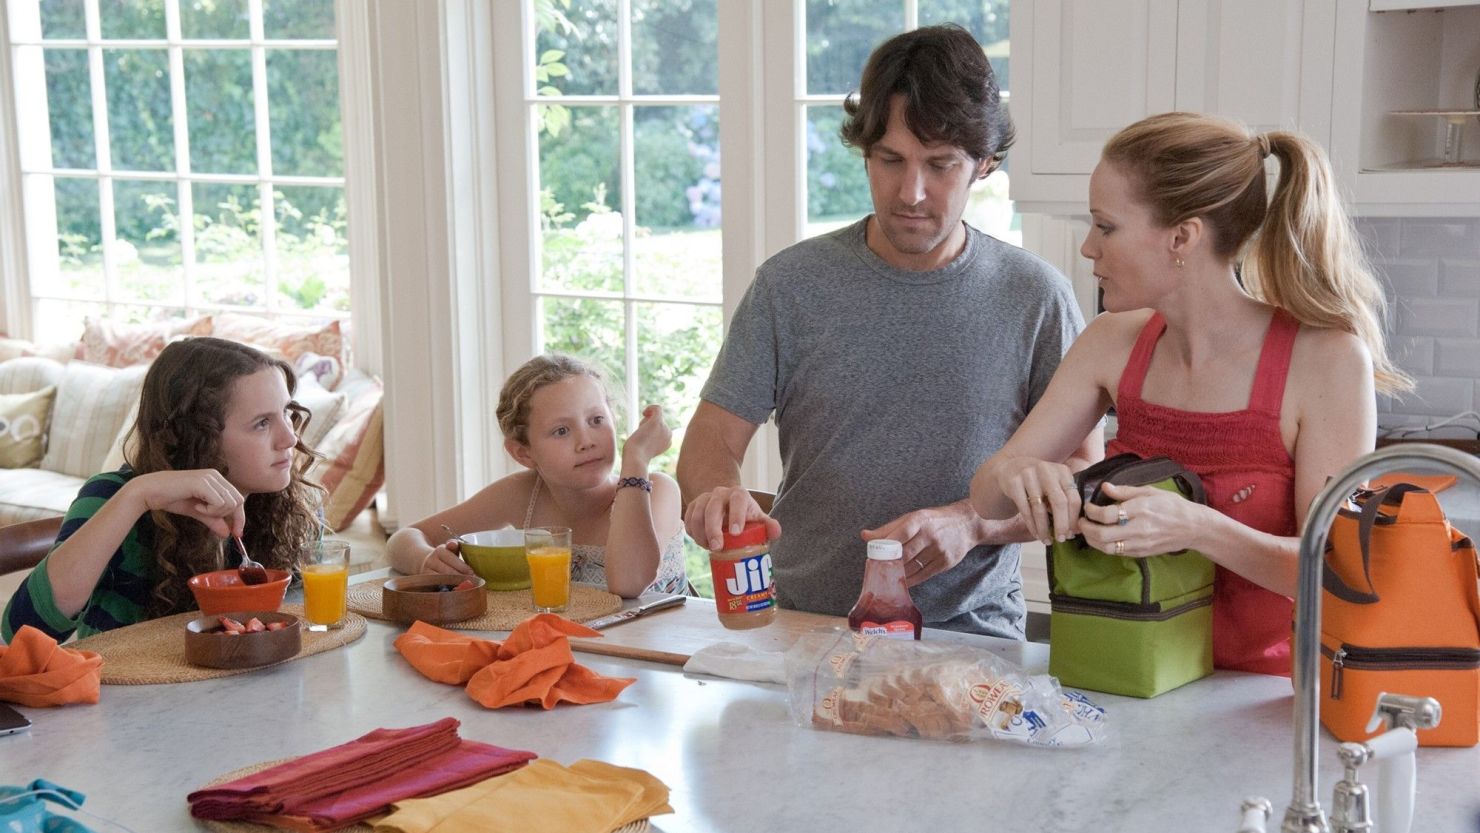 Maude Apatow, Iris Apatow, Paul Rudd and Leslie Mann star in Judd Apatow's "This Is 40."